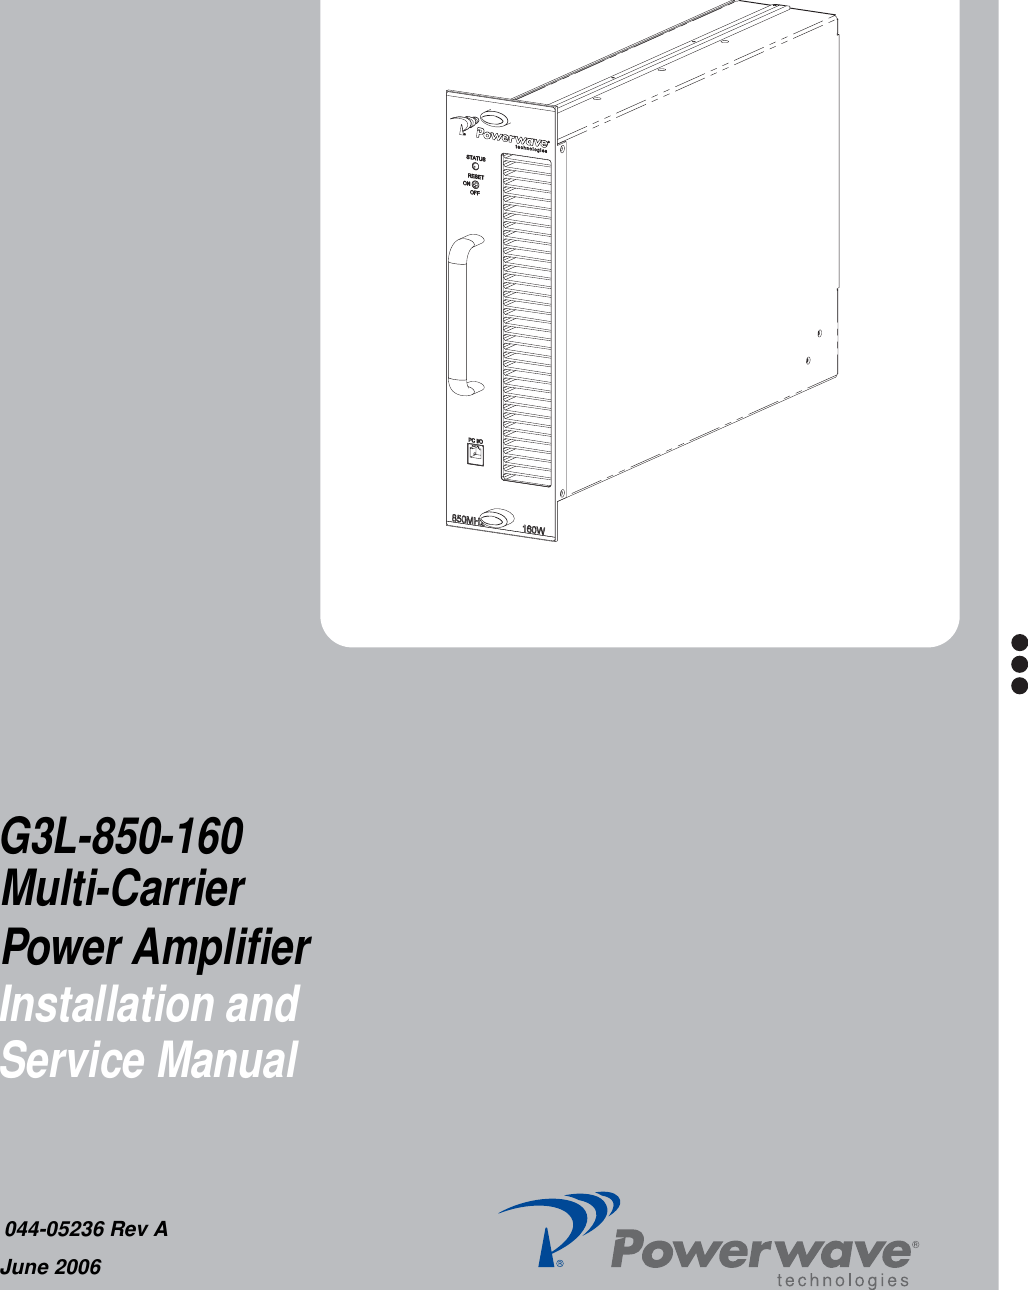 G3L-850-160 Installation and Service Manual044-05236 Rev AJune 2006Multi-CarrierPower Amplifier